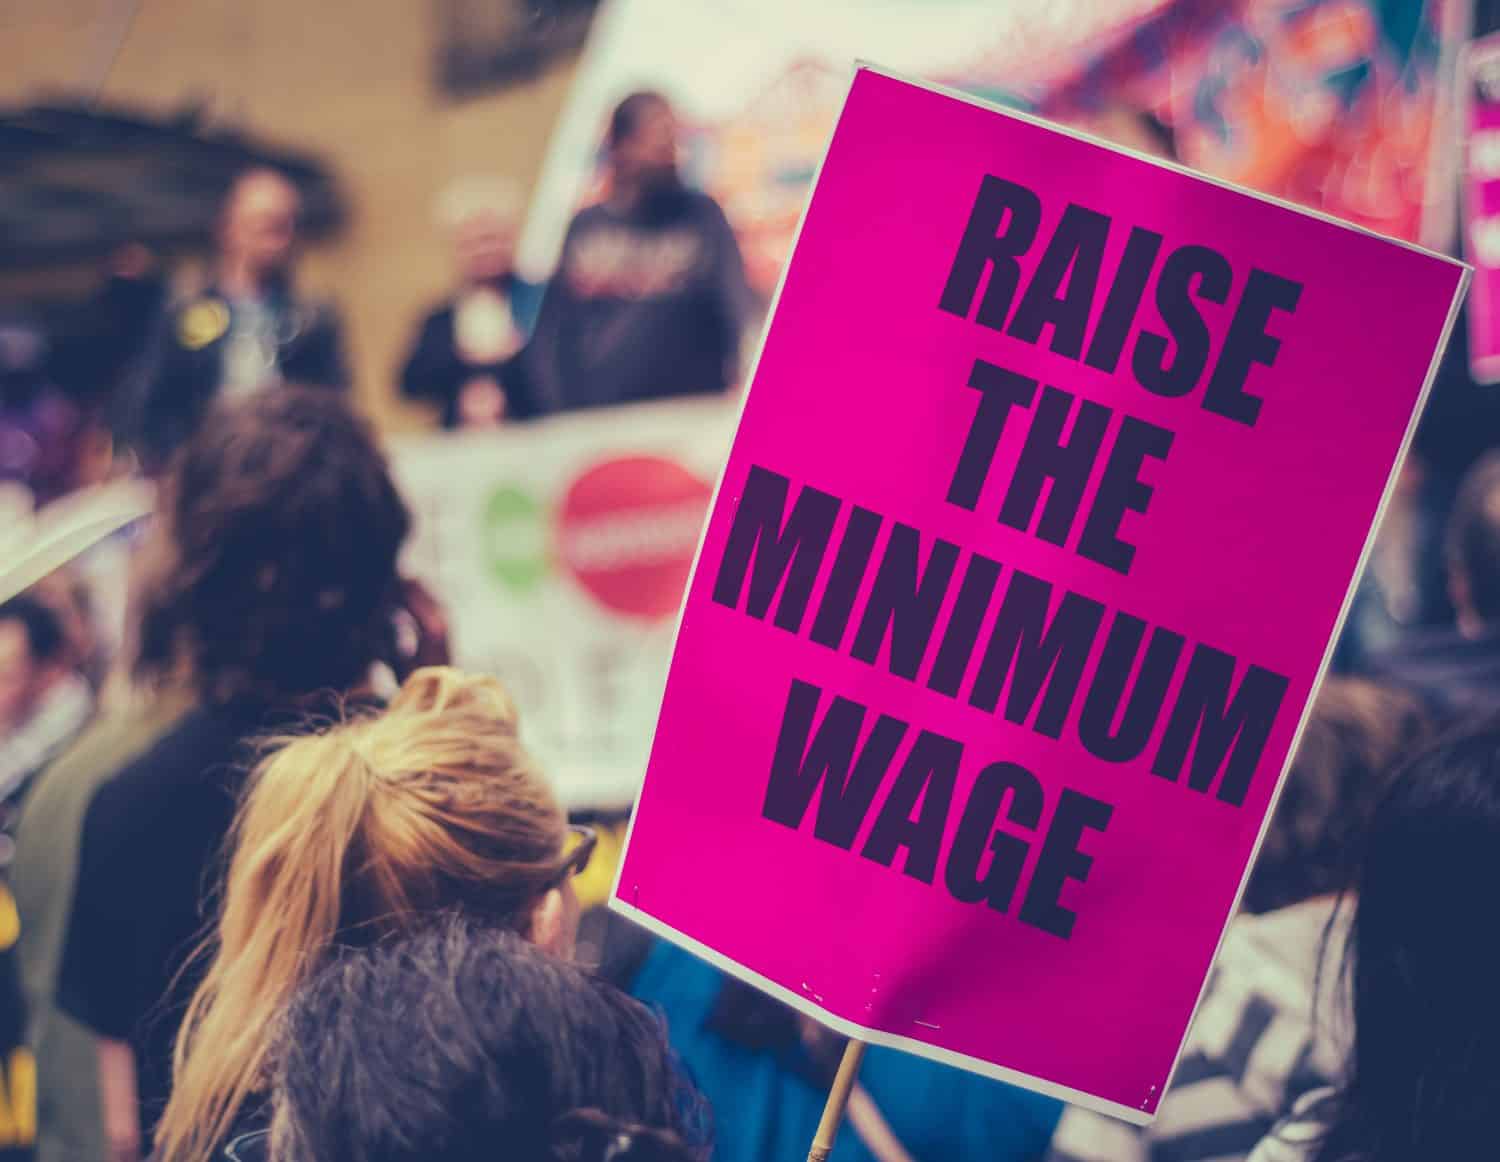 A Raise The Minimum Wage Sign At Worker's Rights Protest Or Rally